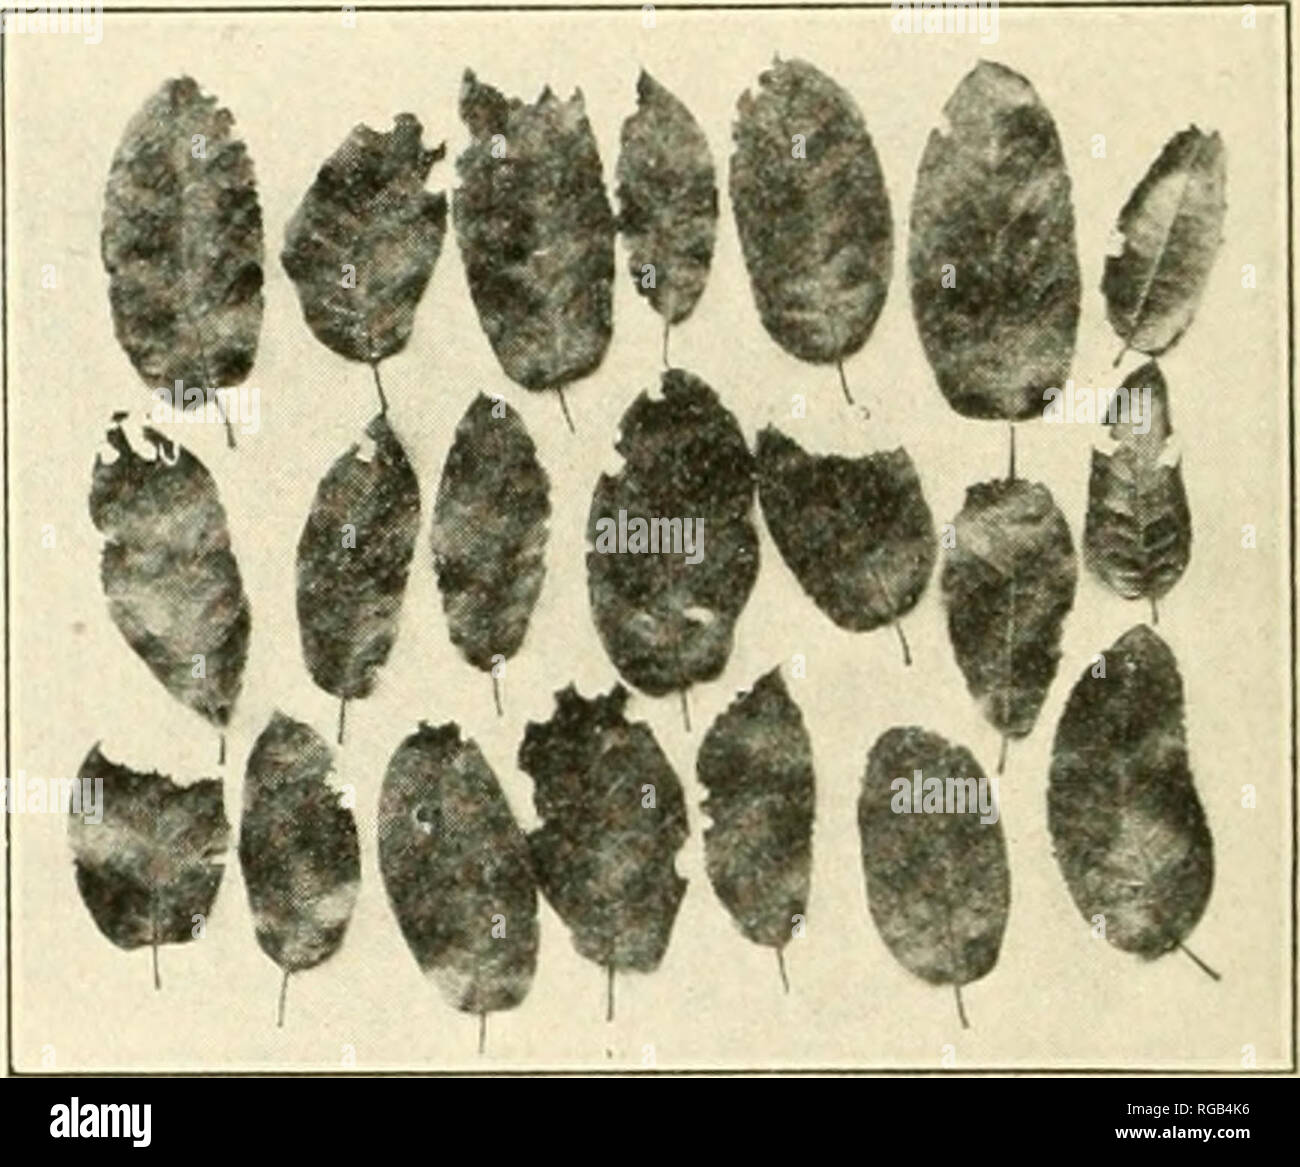 Bulletin of the U.S. Department of Agriculture. Agriculture. Fig. 2.âWood  from .scar on living red fir(.46fc,s viagnifica) mined by larvfe of  Tnichi/kde nhhhoKa. (Photograph by H. E. Burlie.) (Original.) Â»â¢â¢â â